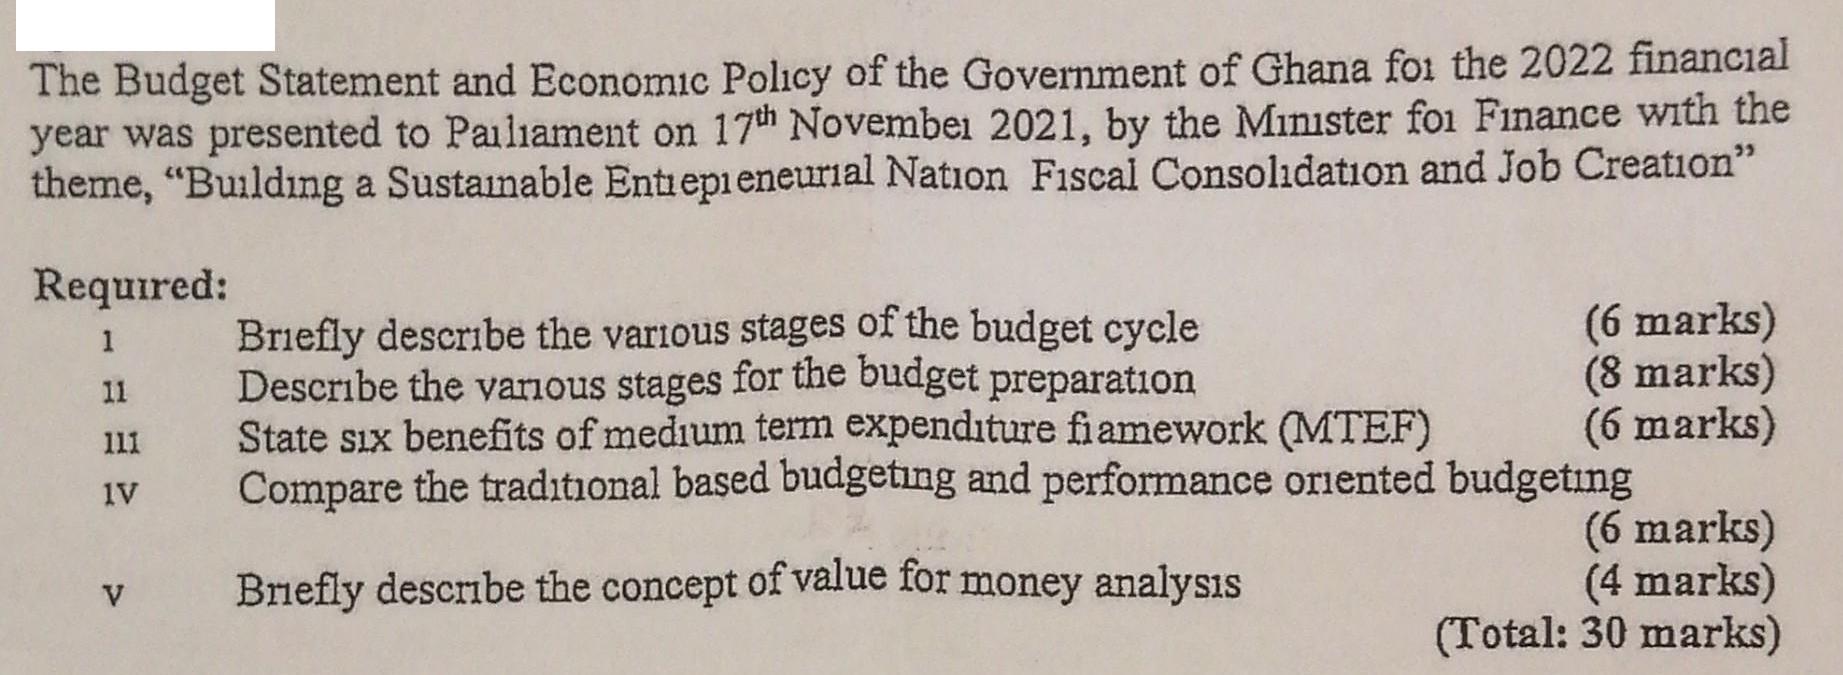 The Budget Statement and Economic Policy of the Government of Ghana for the 2022 financial year was presented